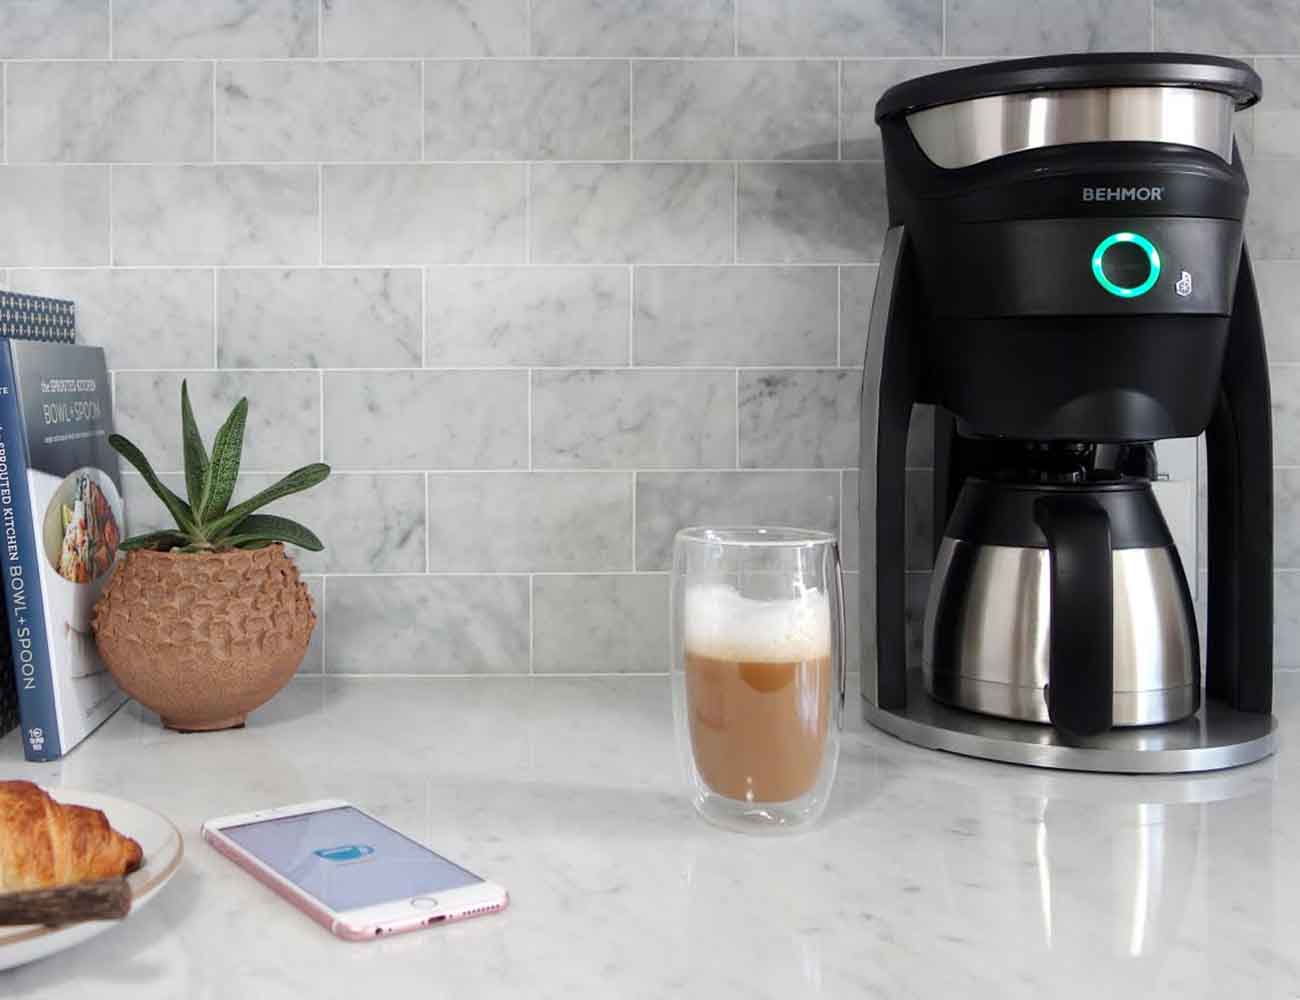 https://thegadgetflow.com/wp-content/uploads/2016/03/Behmor-Connected-Temperature-Control-Coffee-Maker-1.jpg